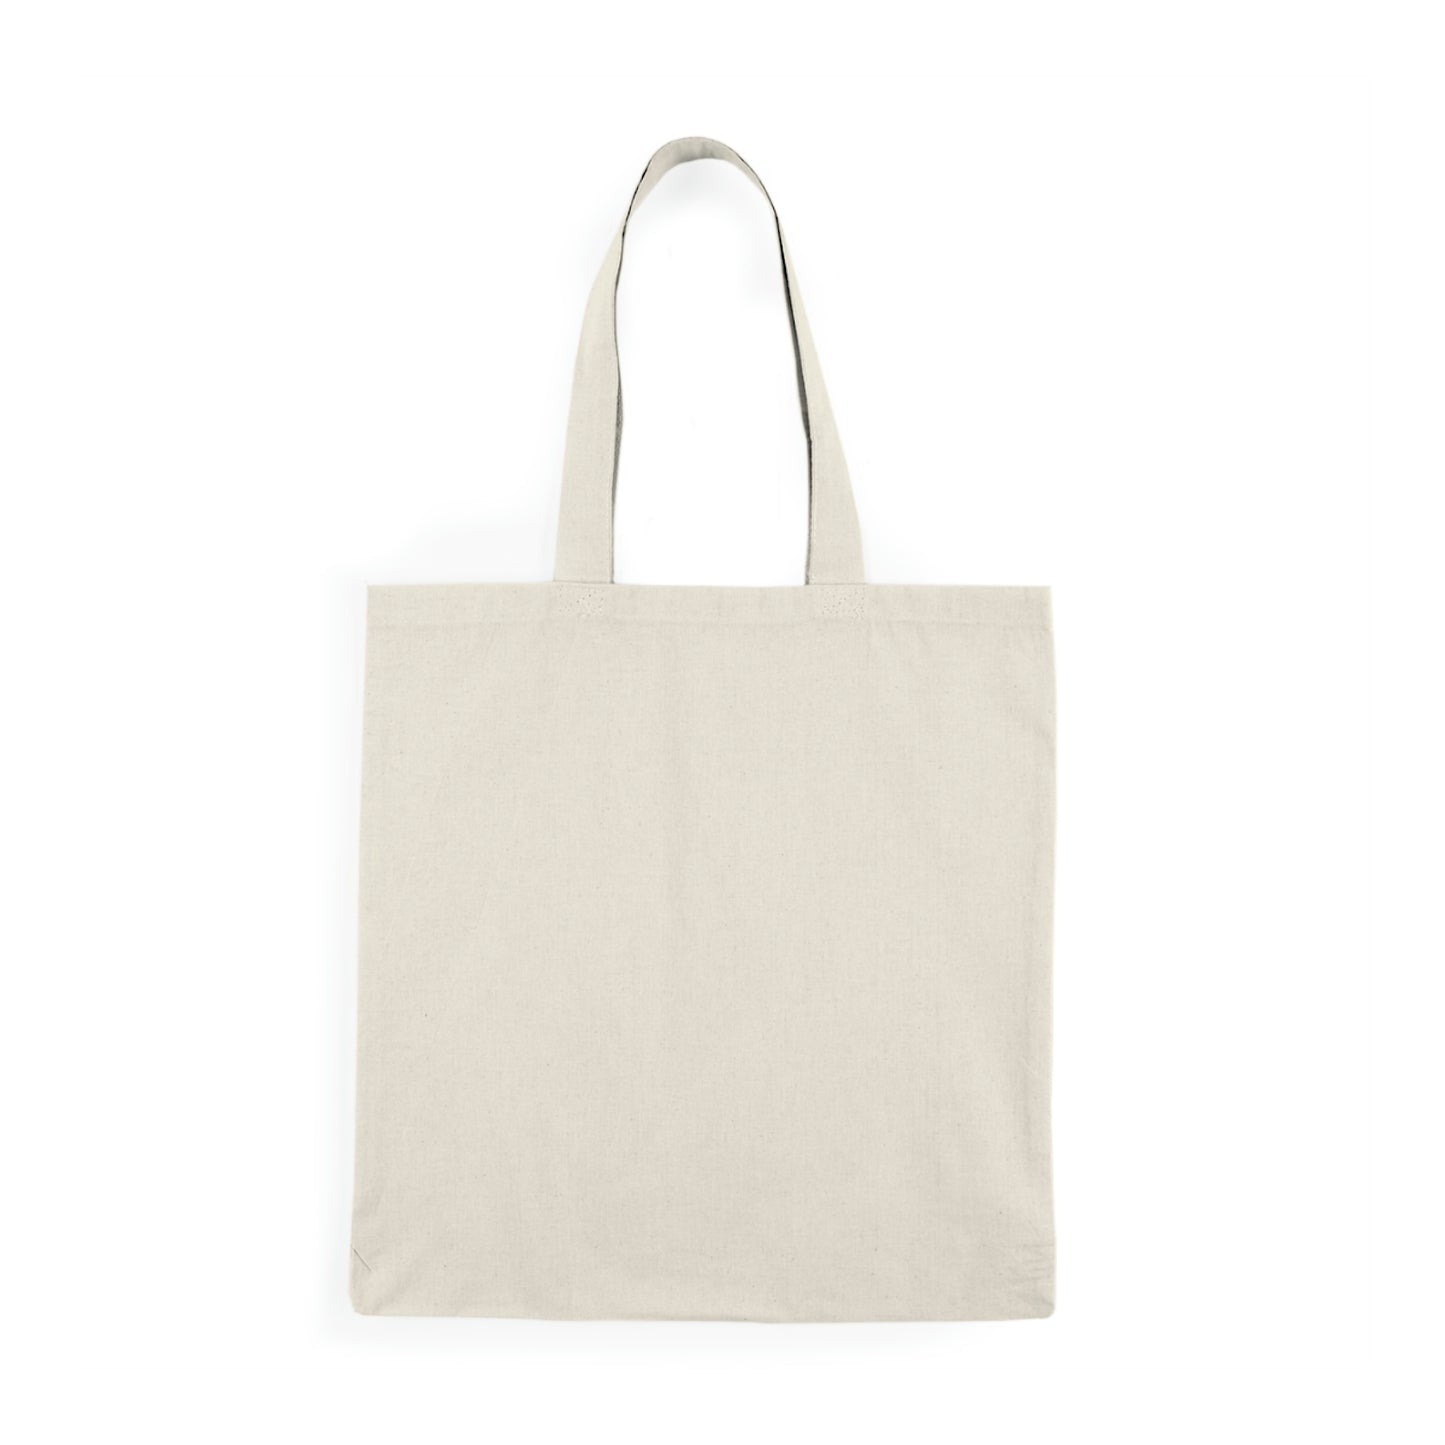 Fishnets in the Far East - Natural Tote Bag